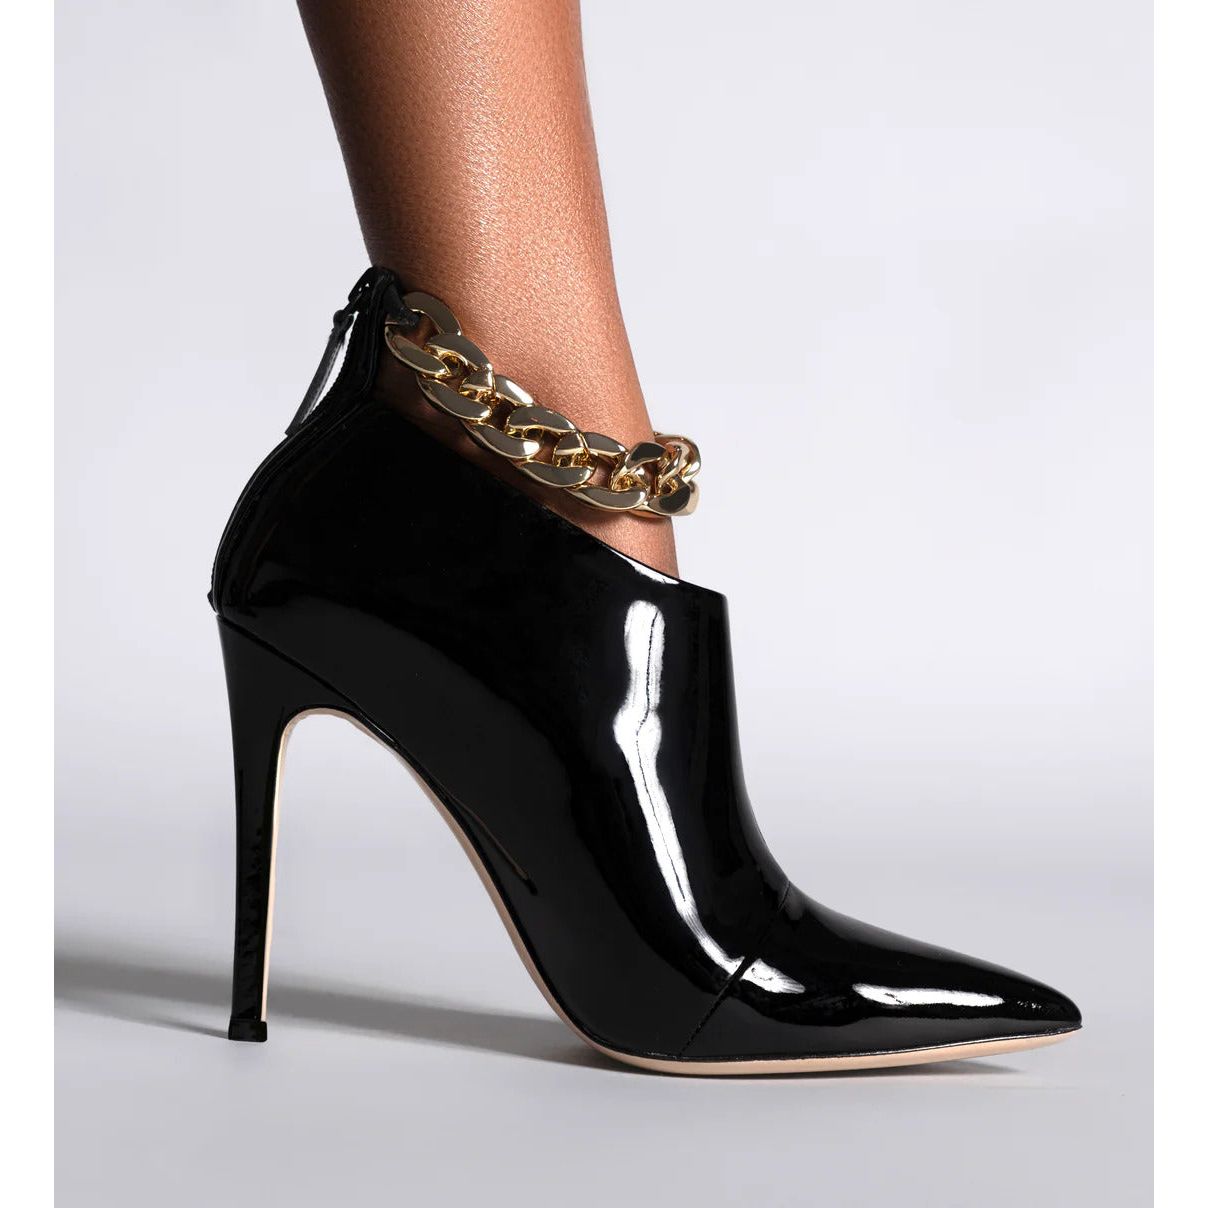 Women's Chain Decoration Ankle Boots Back Zipper Stiletto Heels Black Patent Leather & Suede Styles - Frimunt Clothing Co.